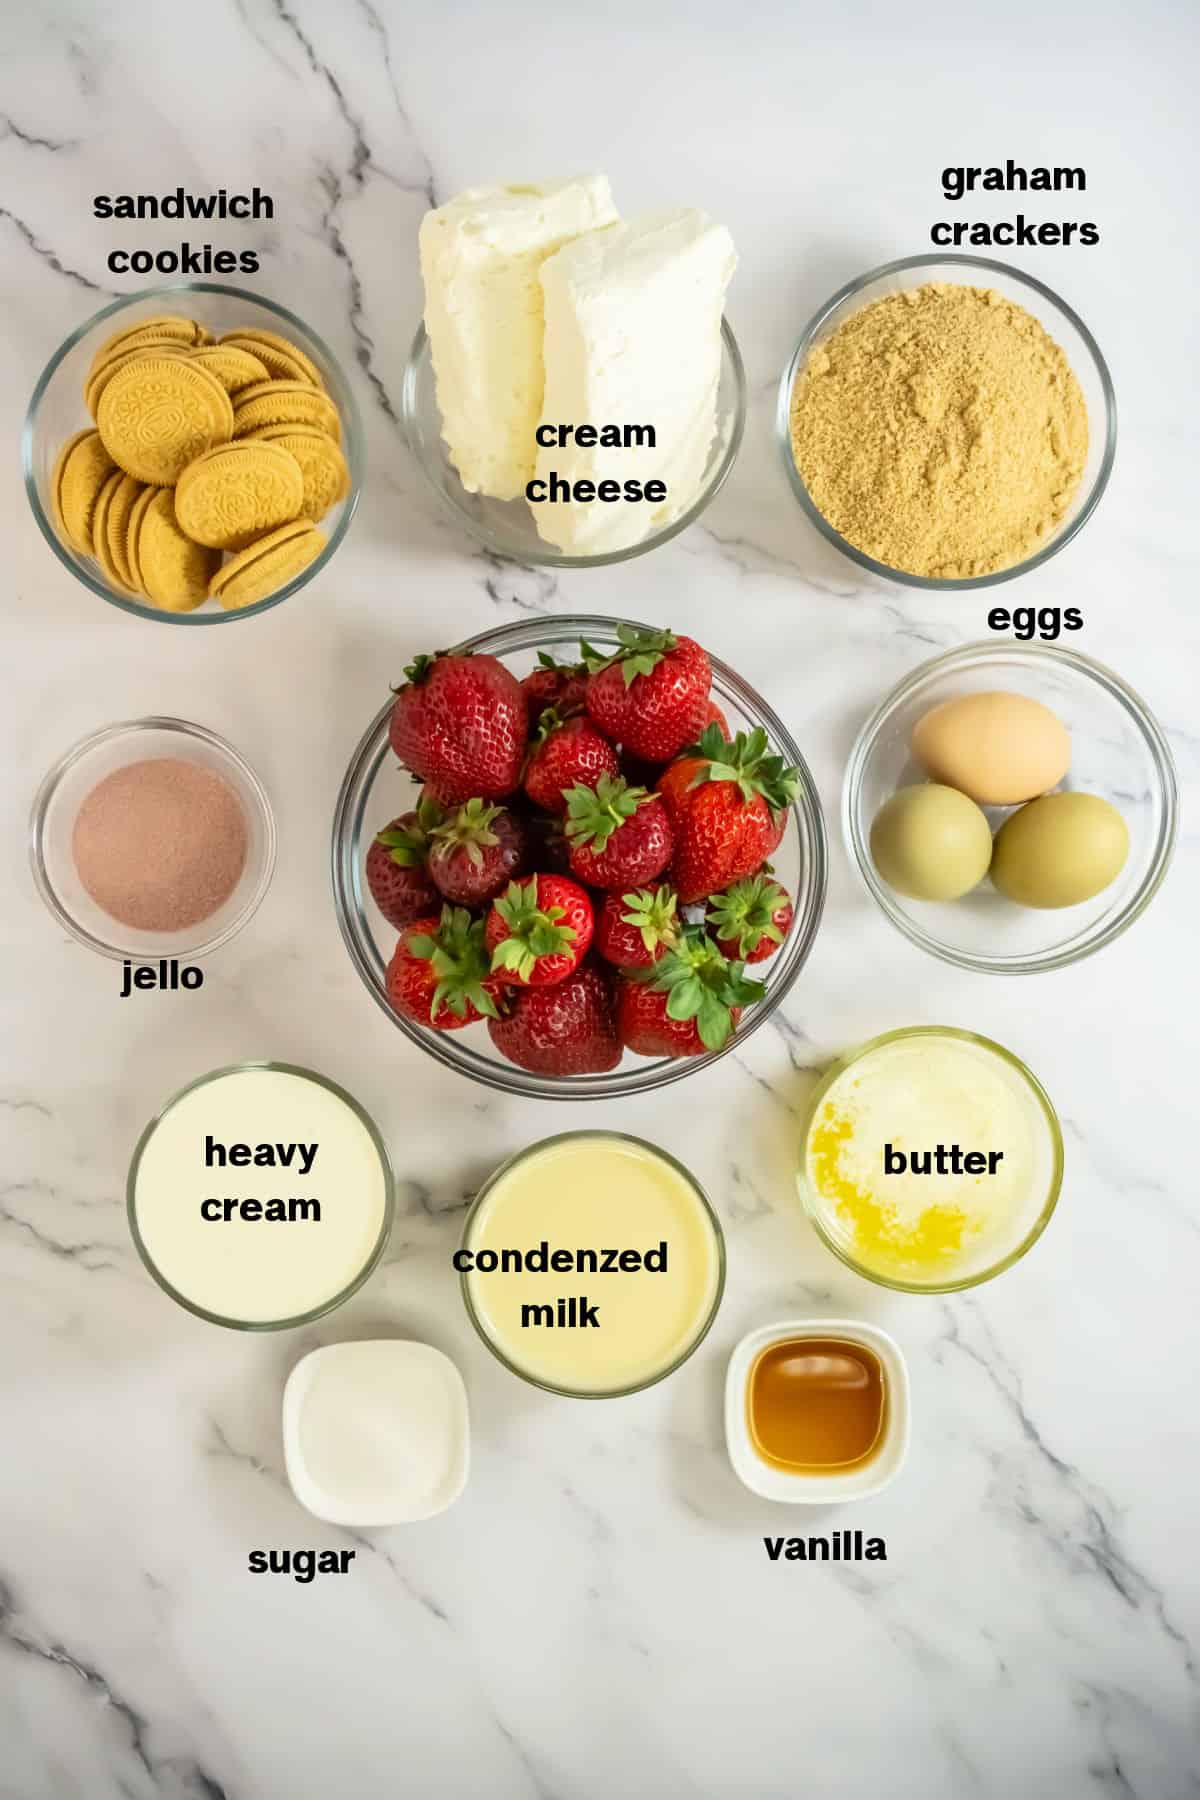 Strawberry Crunch Mini Cheesecakes Ingredients on counter.